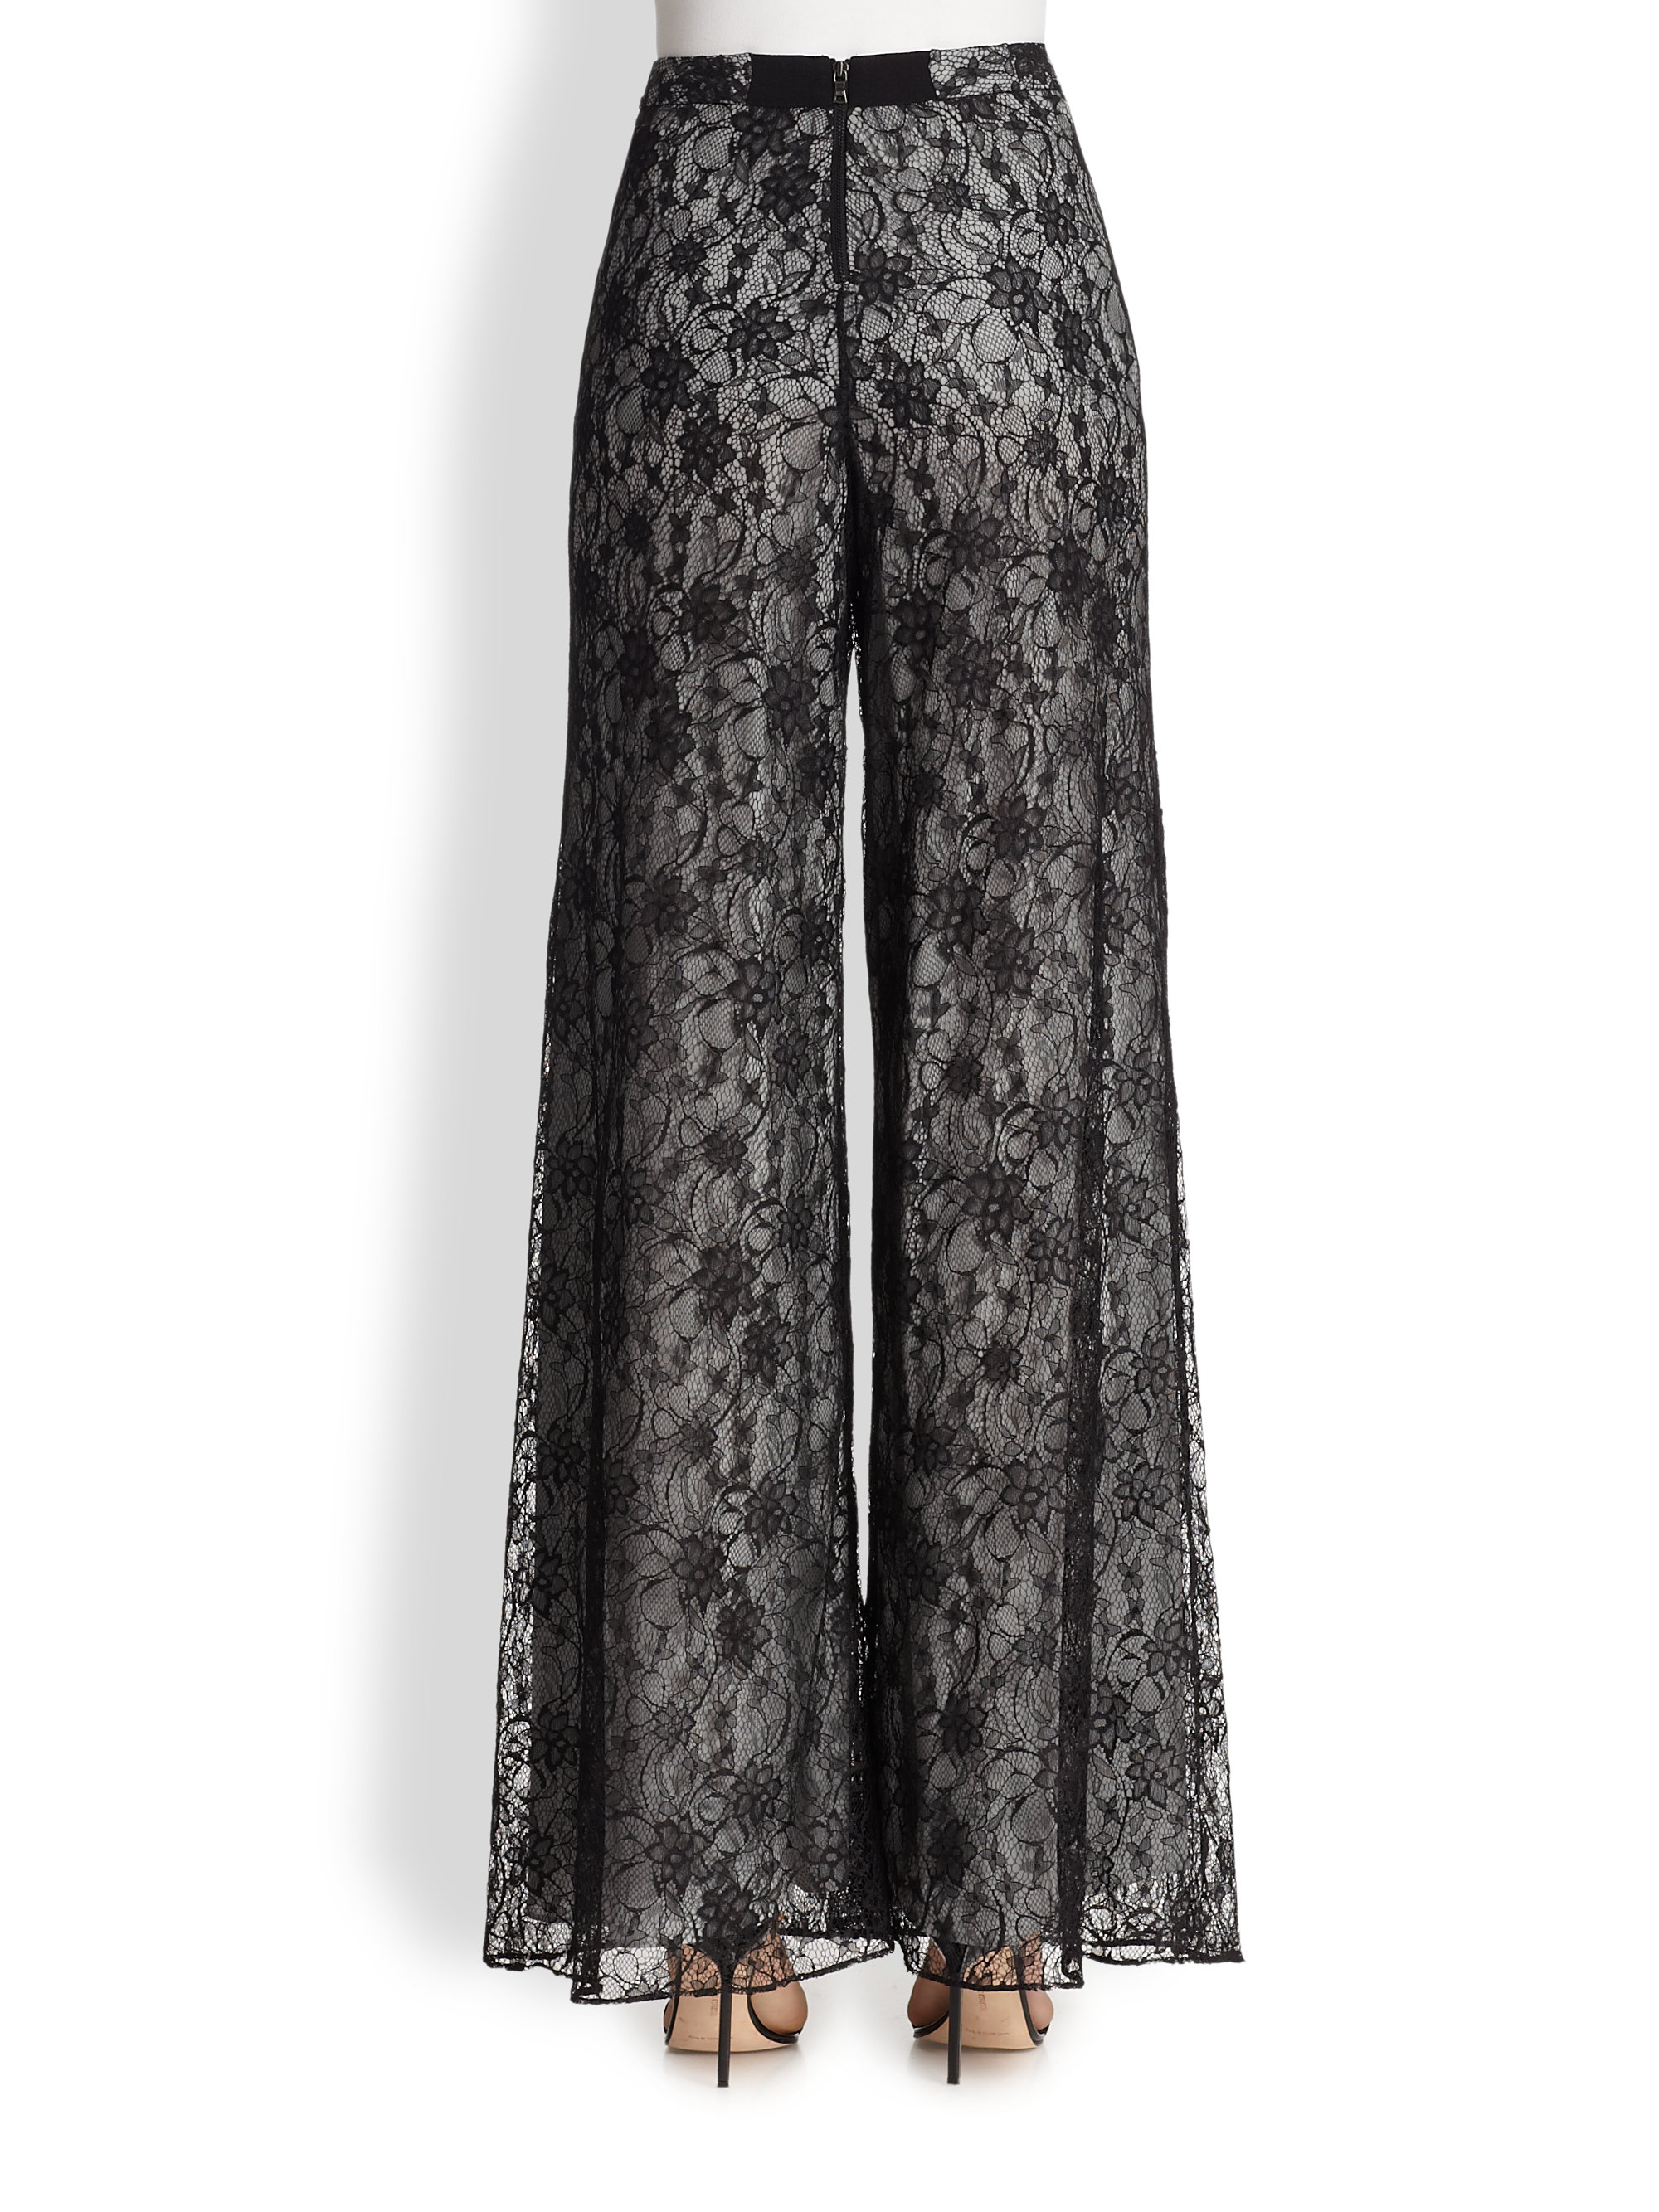 Lyst - Alice + Olivia Super Flared Wide-Leg Lace Pants in Black